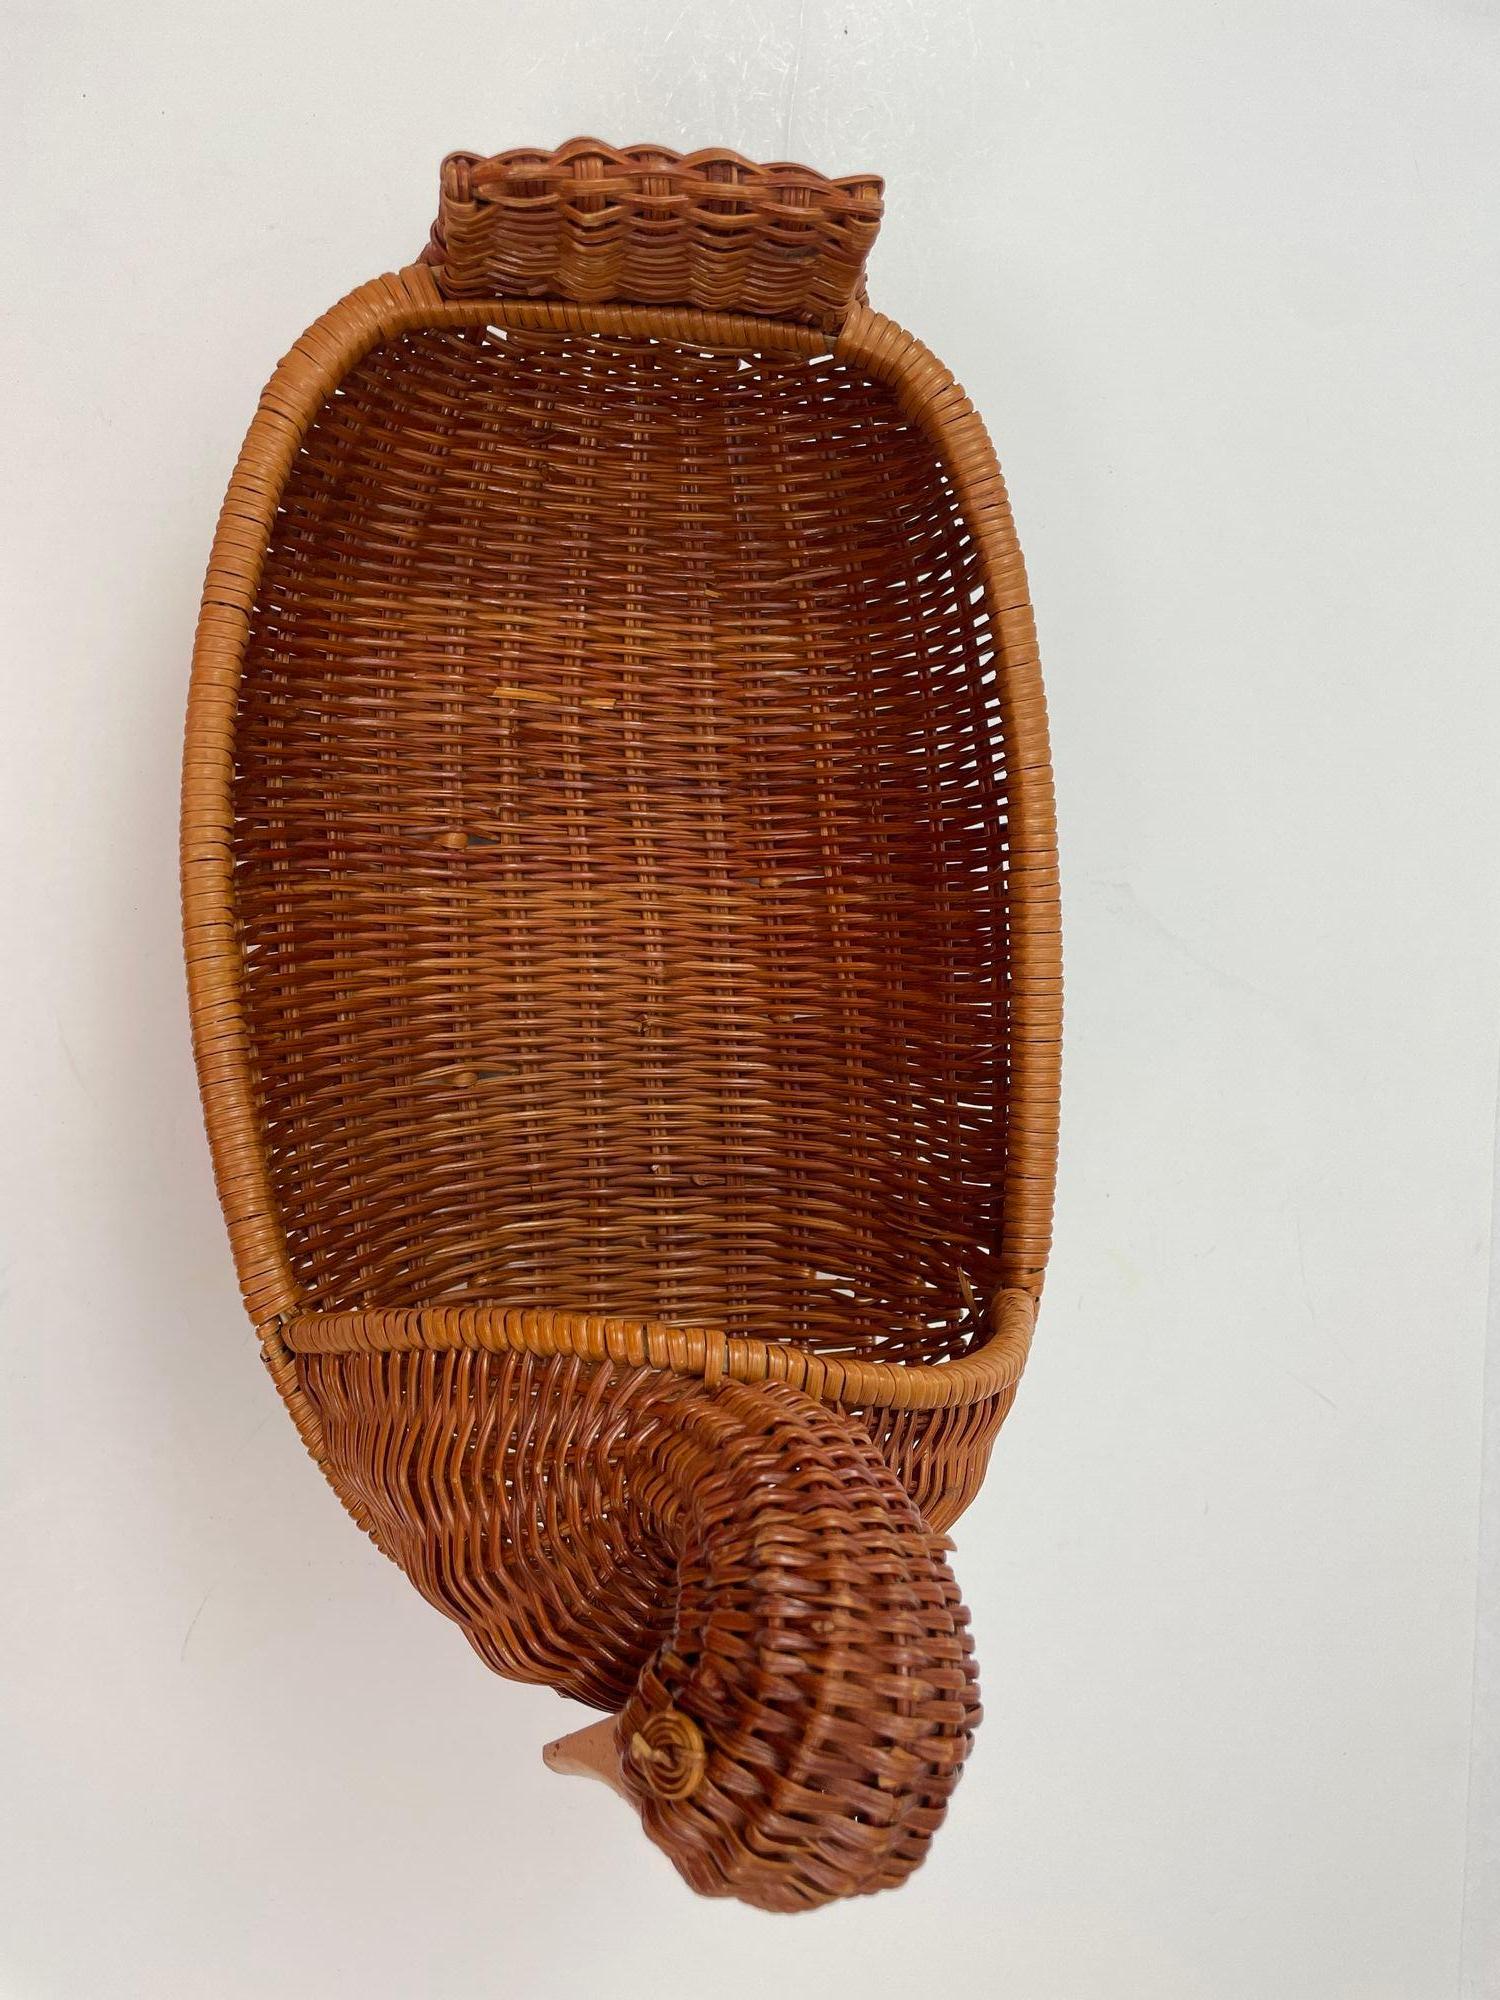 Vintage Wicker Rattan Woven Duck Motif Basket In Good Condition For Sale In North Hollywood, CA